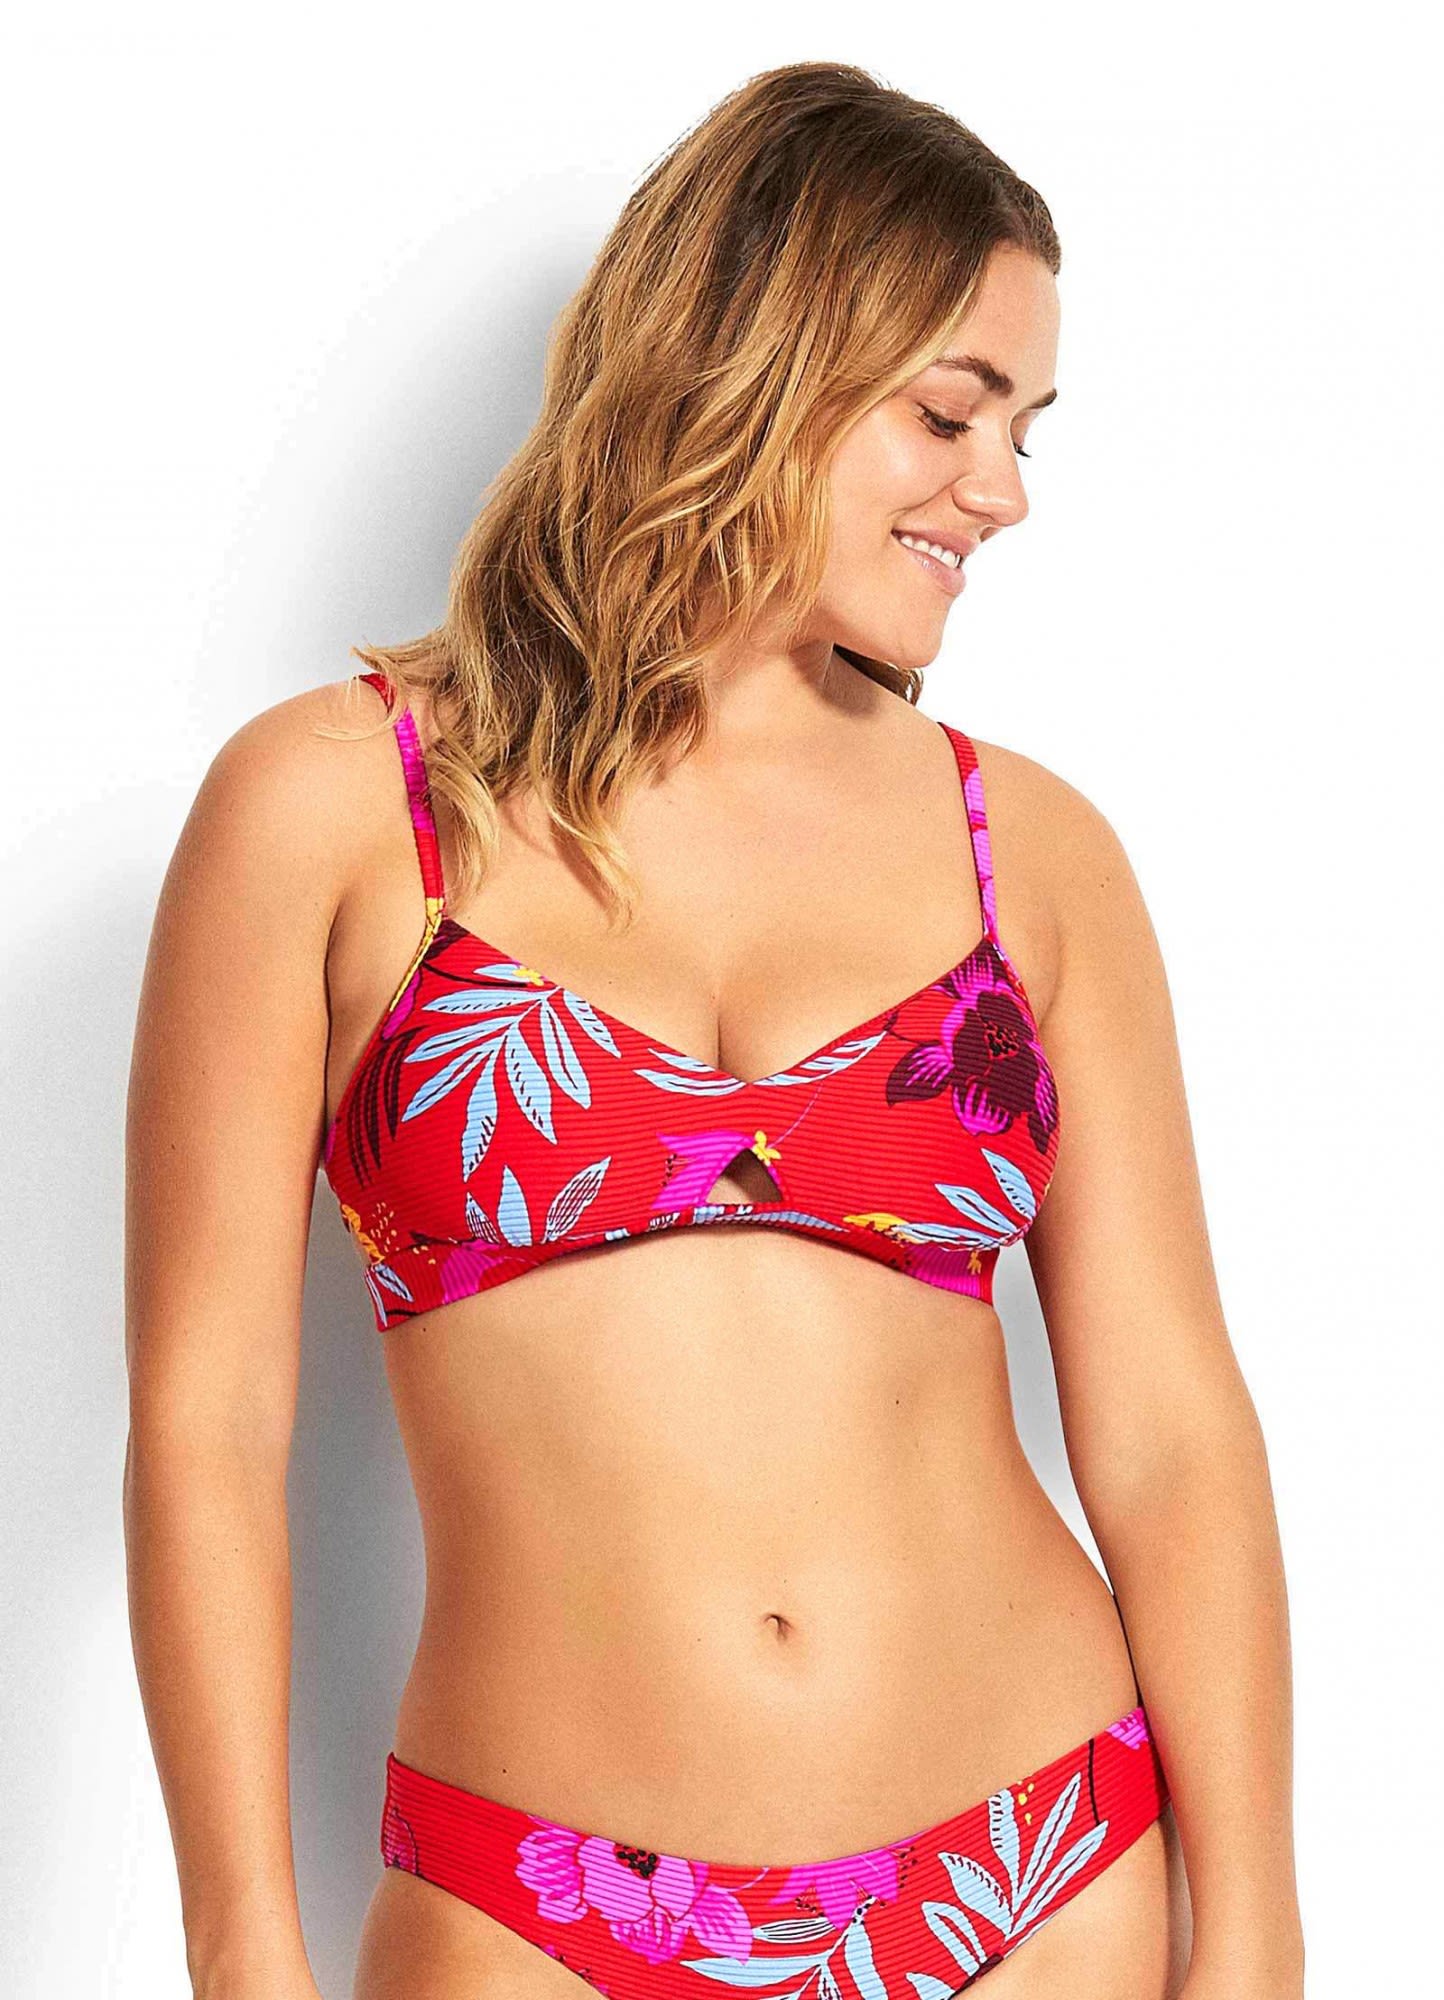 Seafolly ON Vacation Keyhole Bralette Pink- Female Bade-Oberteile- Grsse AUS 10 - EU 36 - Farbe Chili unter Seafolly